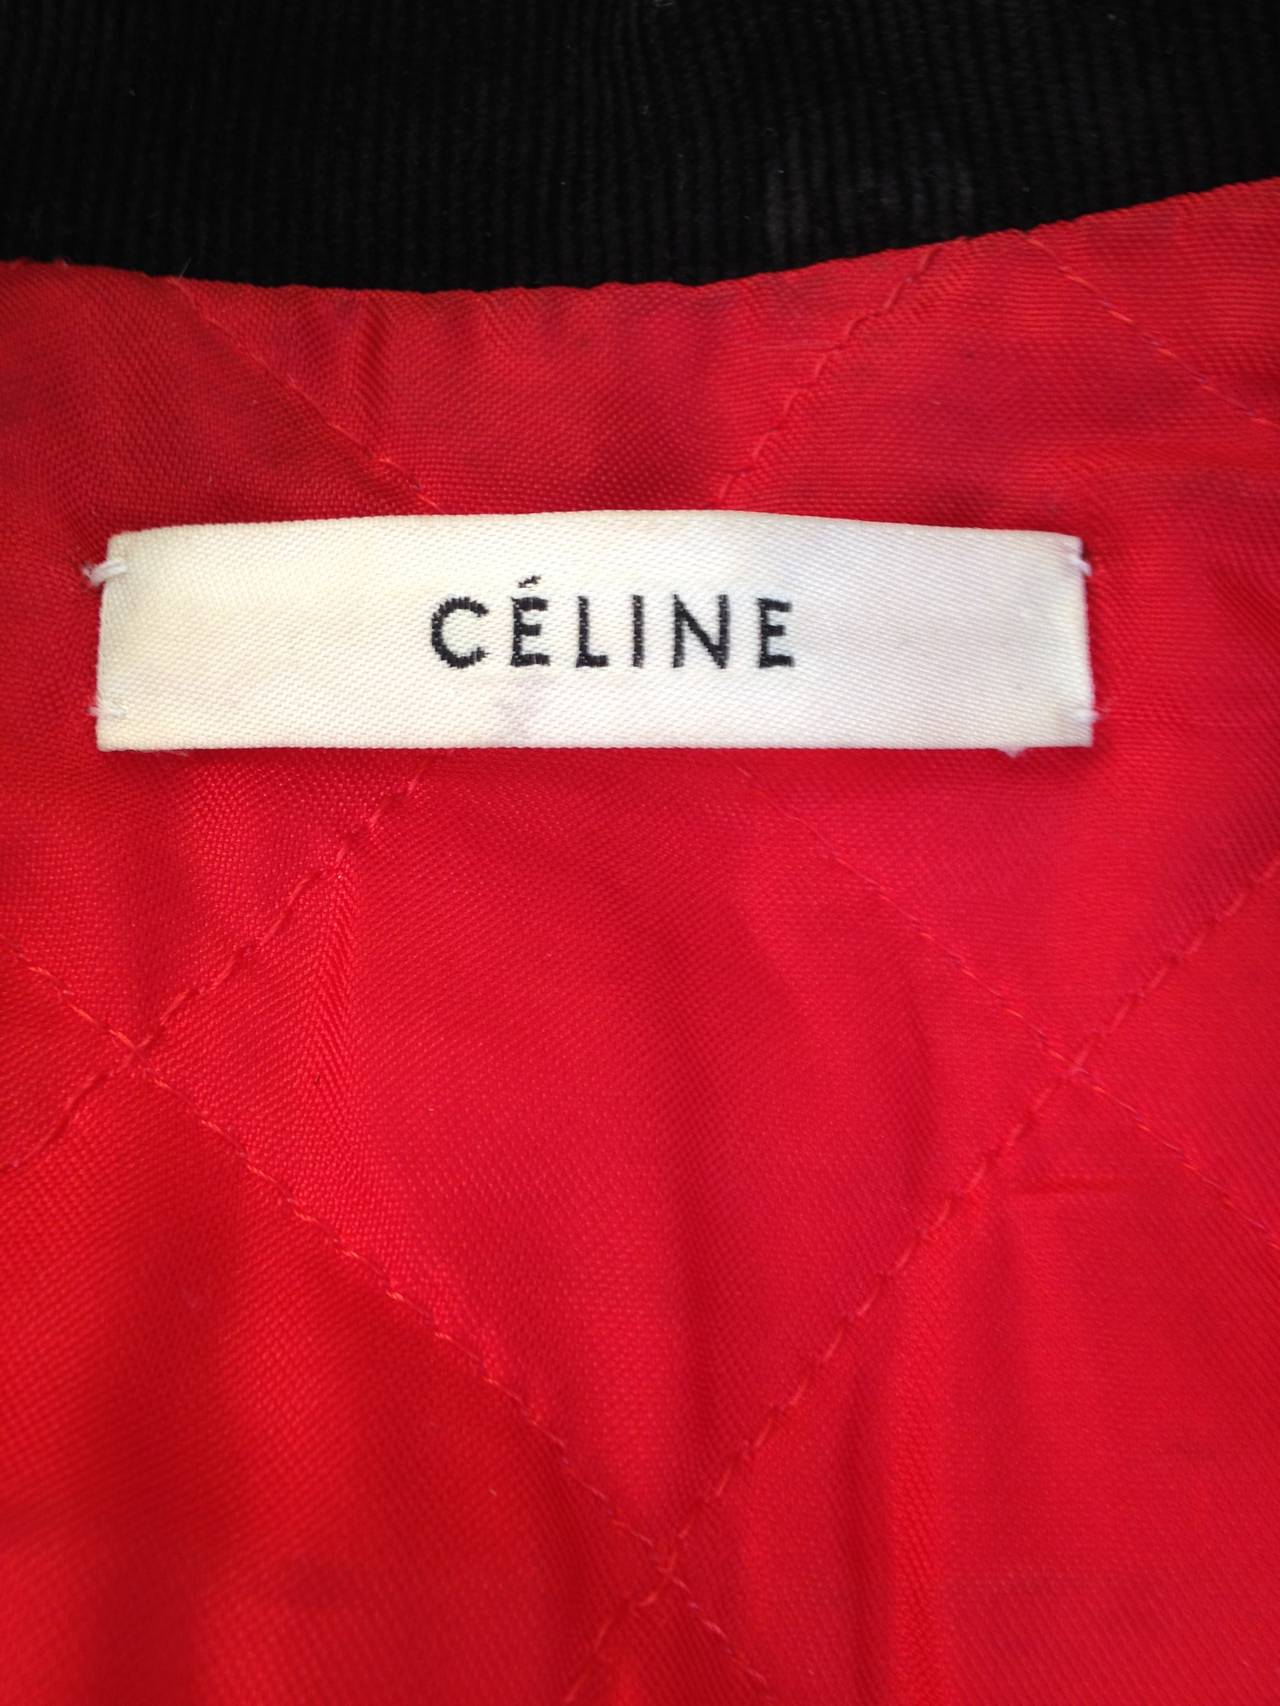 What a wild piece! This motorcycle vest by Celine, in an ultra soft leather, is decorated all over with a blossoming floral design. The sweetness of the soft whites and reds in the flowers contrasts the bold silver tone hardware and asymmetrical